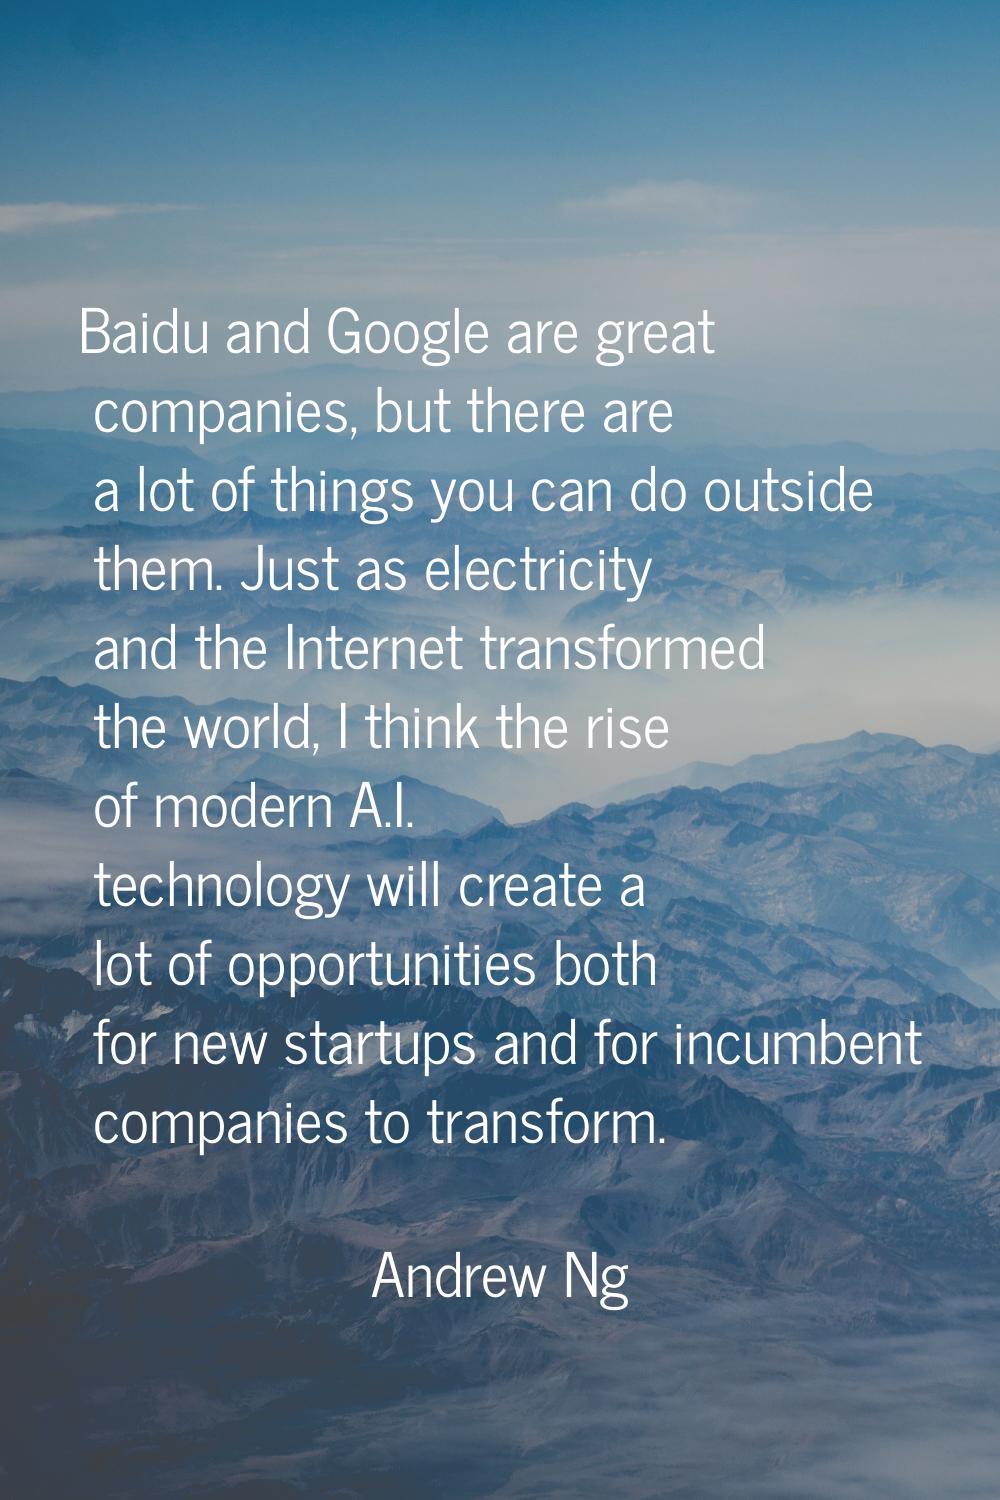 Baidu and Google are great companies, but there are a lot of things you can do outside them. Just a